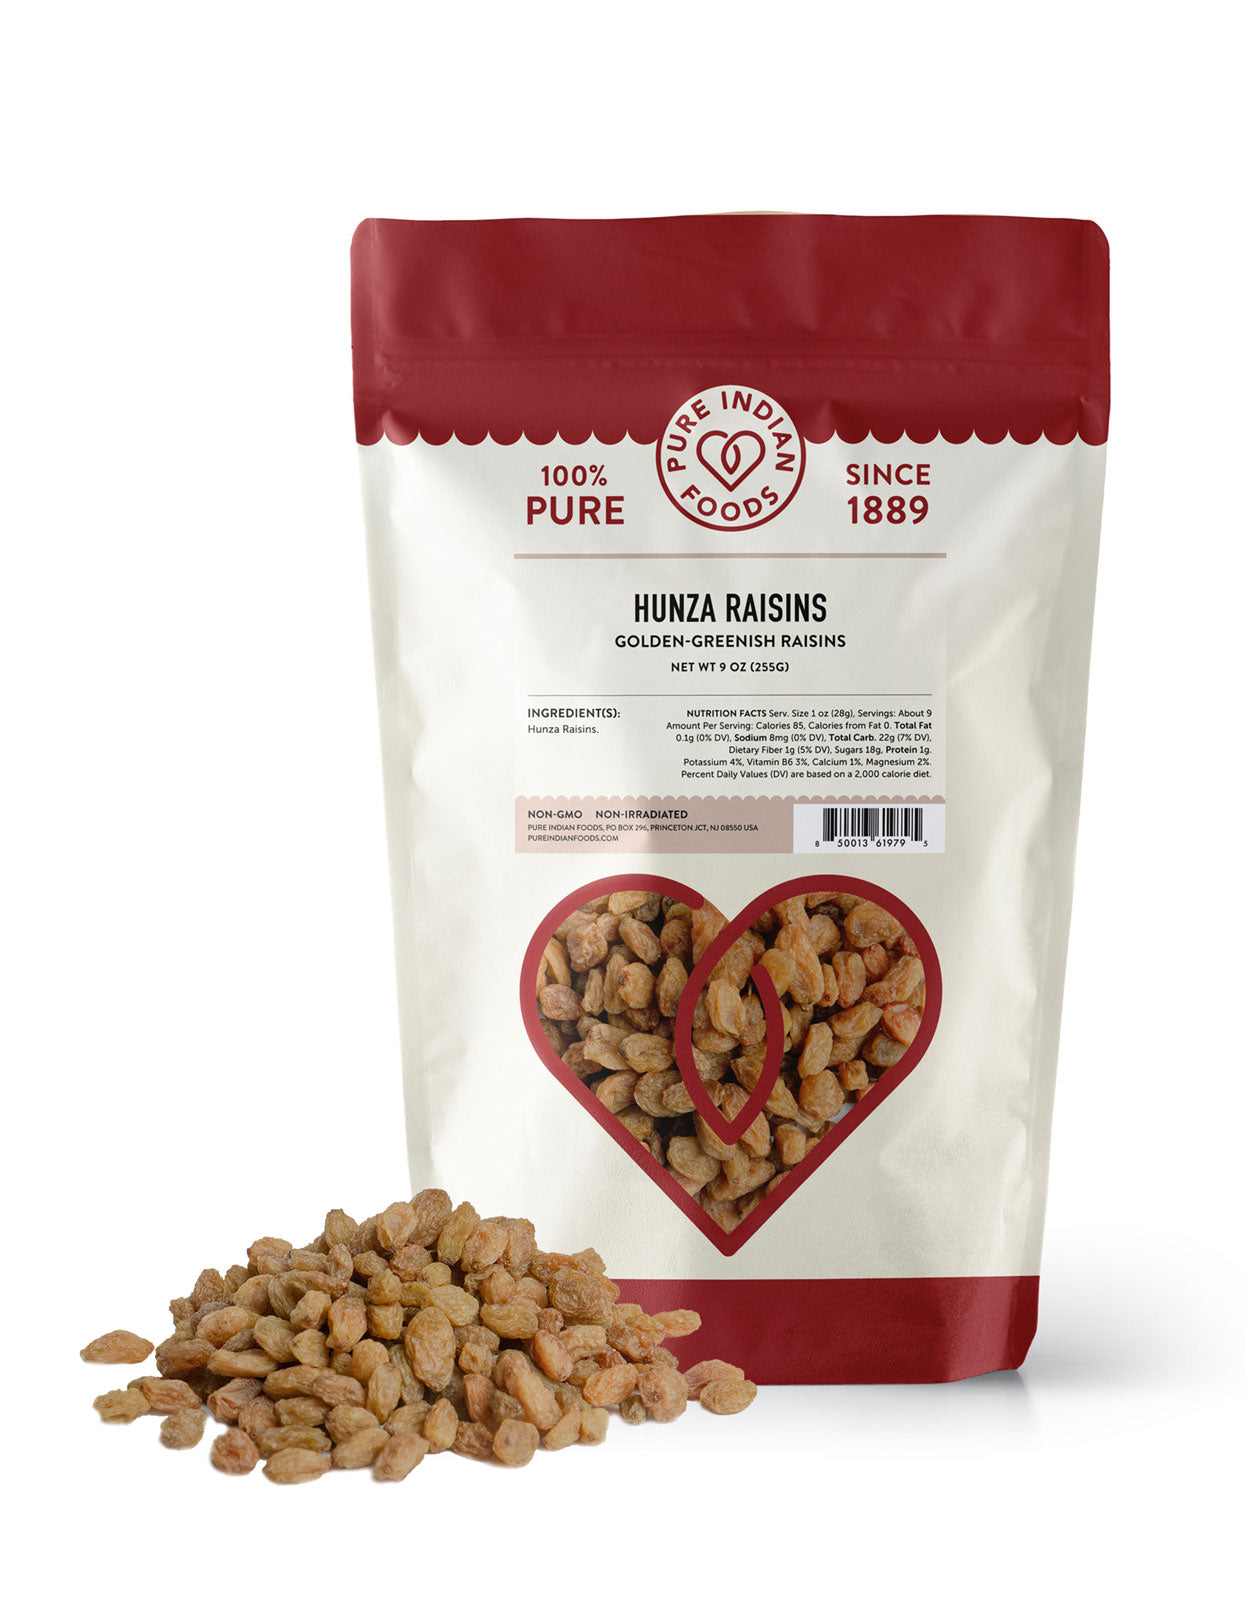 1 bag of Pure Indian Foods Hunza Raisins. These are naturally golden raisins, made from sun-dried sultana grapes that are sulfite-free.